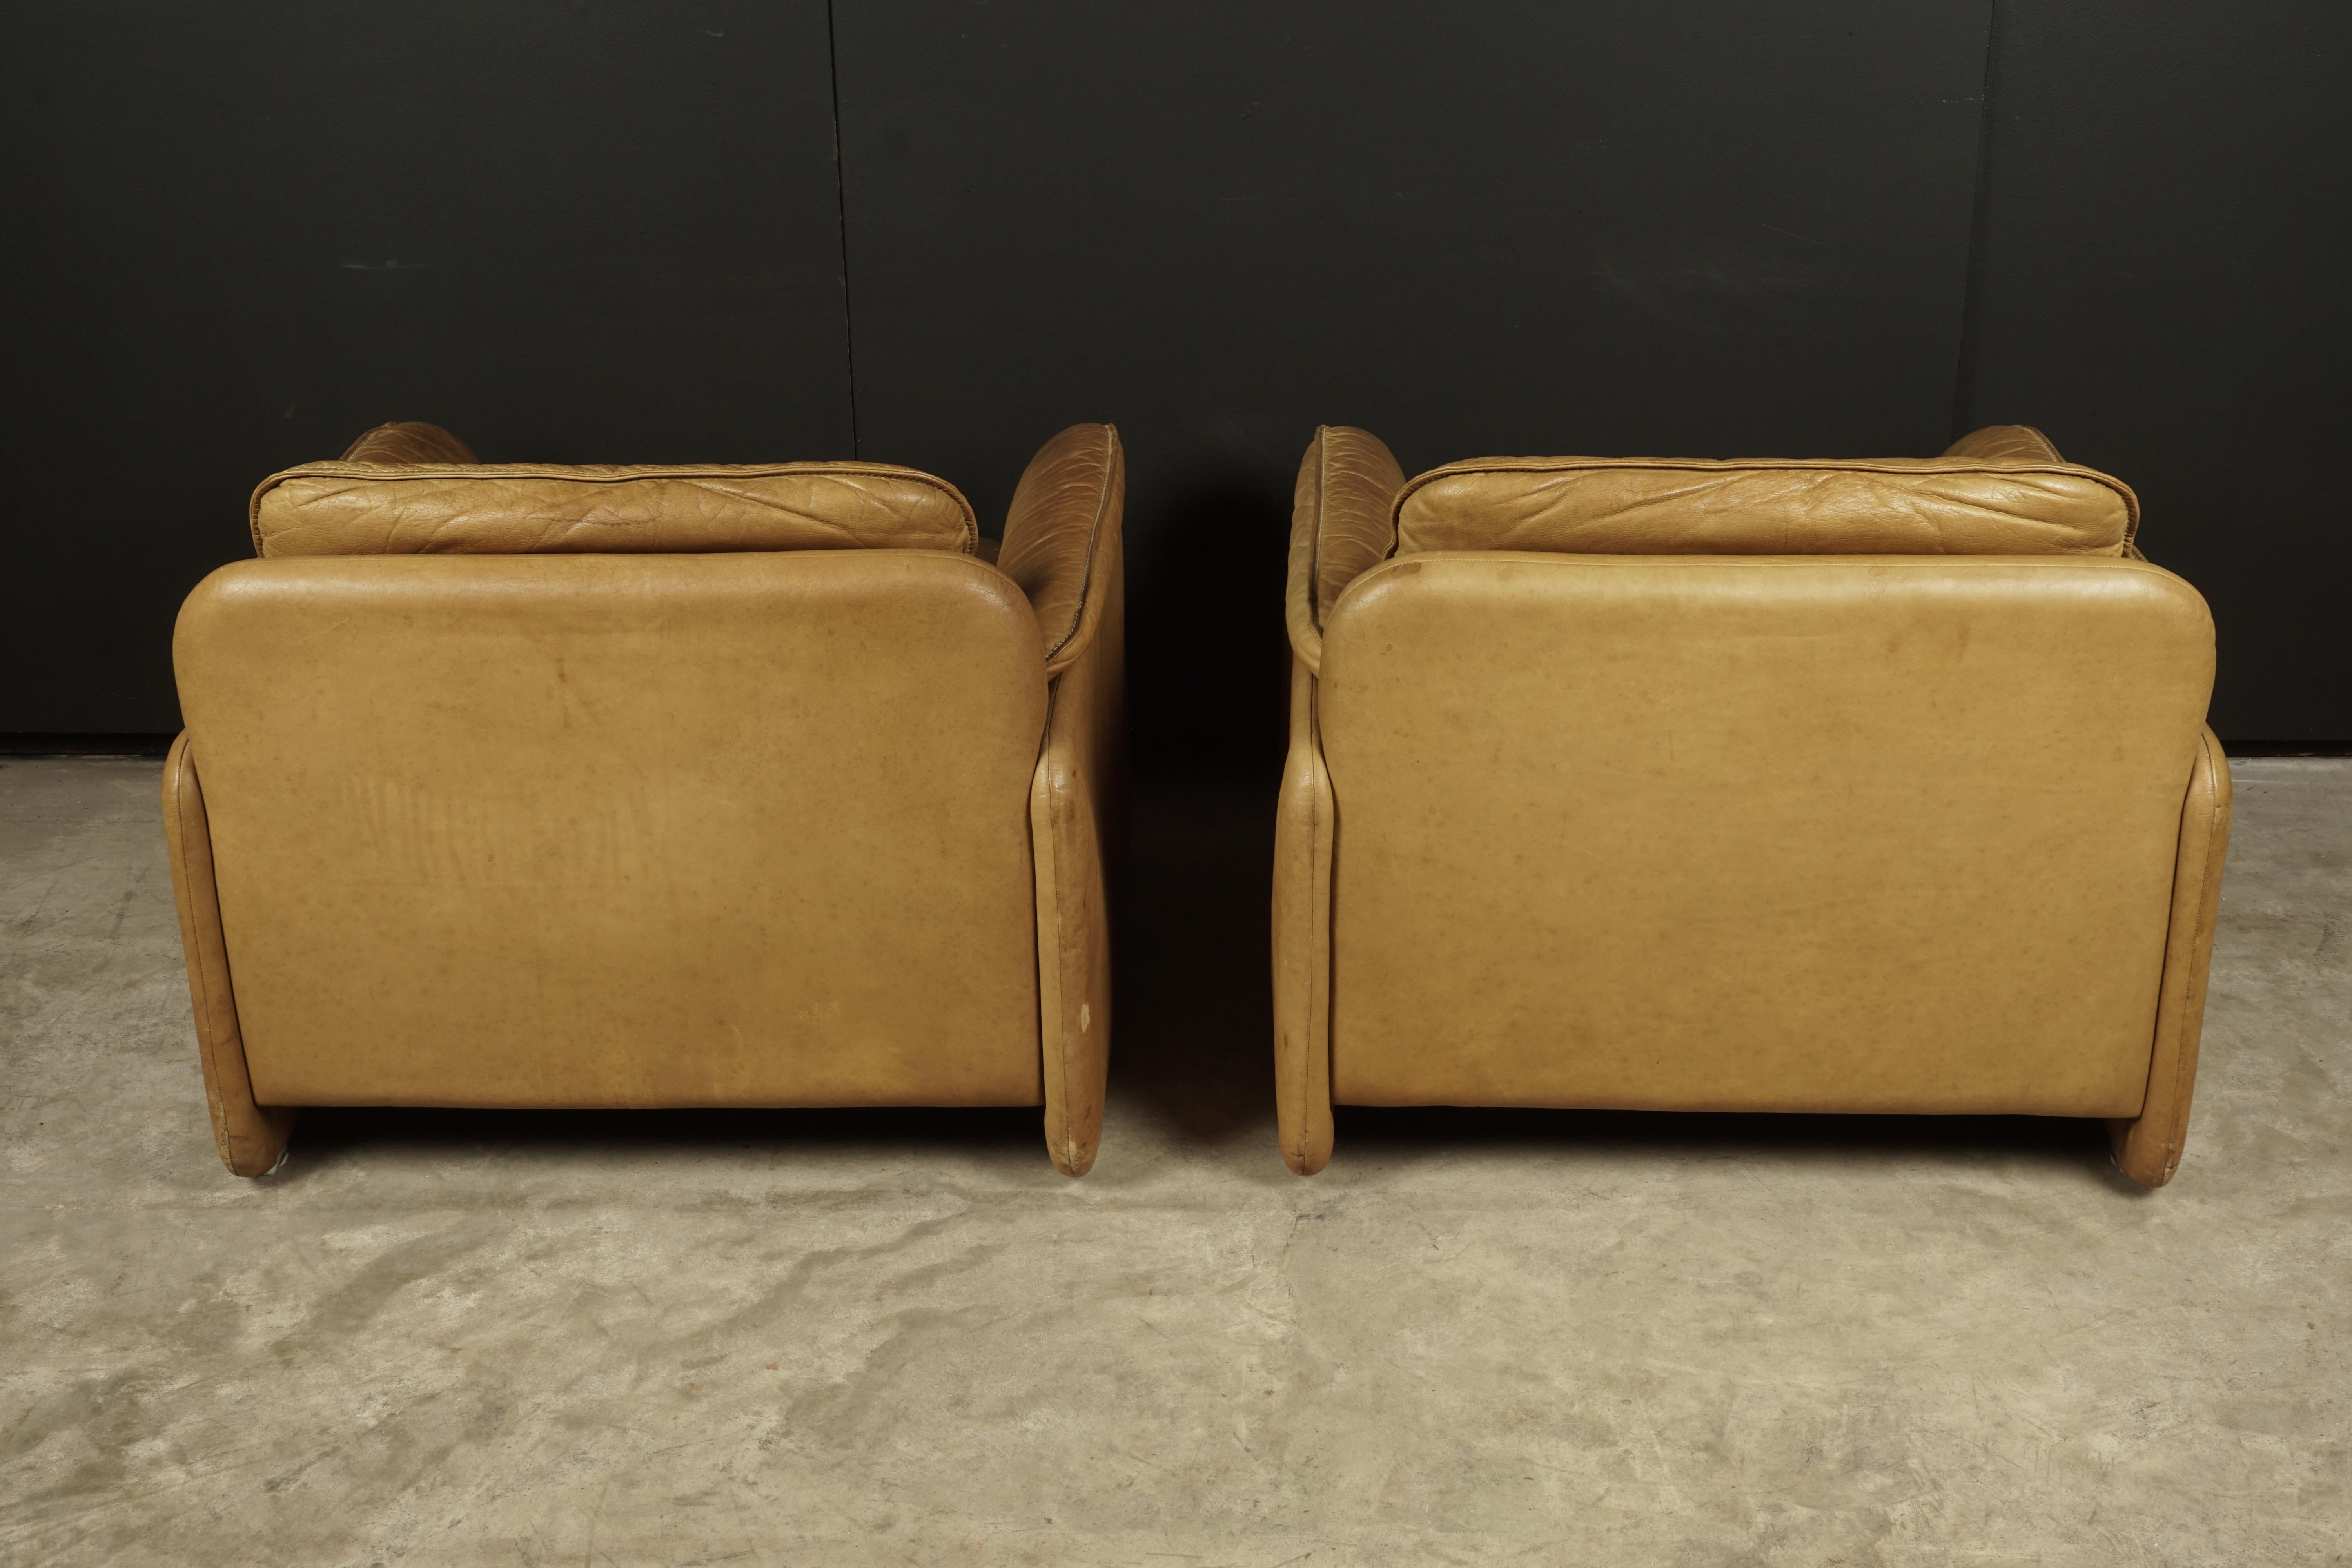 Late 20th Century Vintage Pair of Leather DS61 De Sede Lounge Chairs, from Switzerland, circa 1980